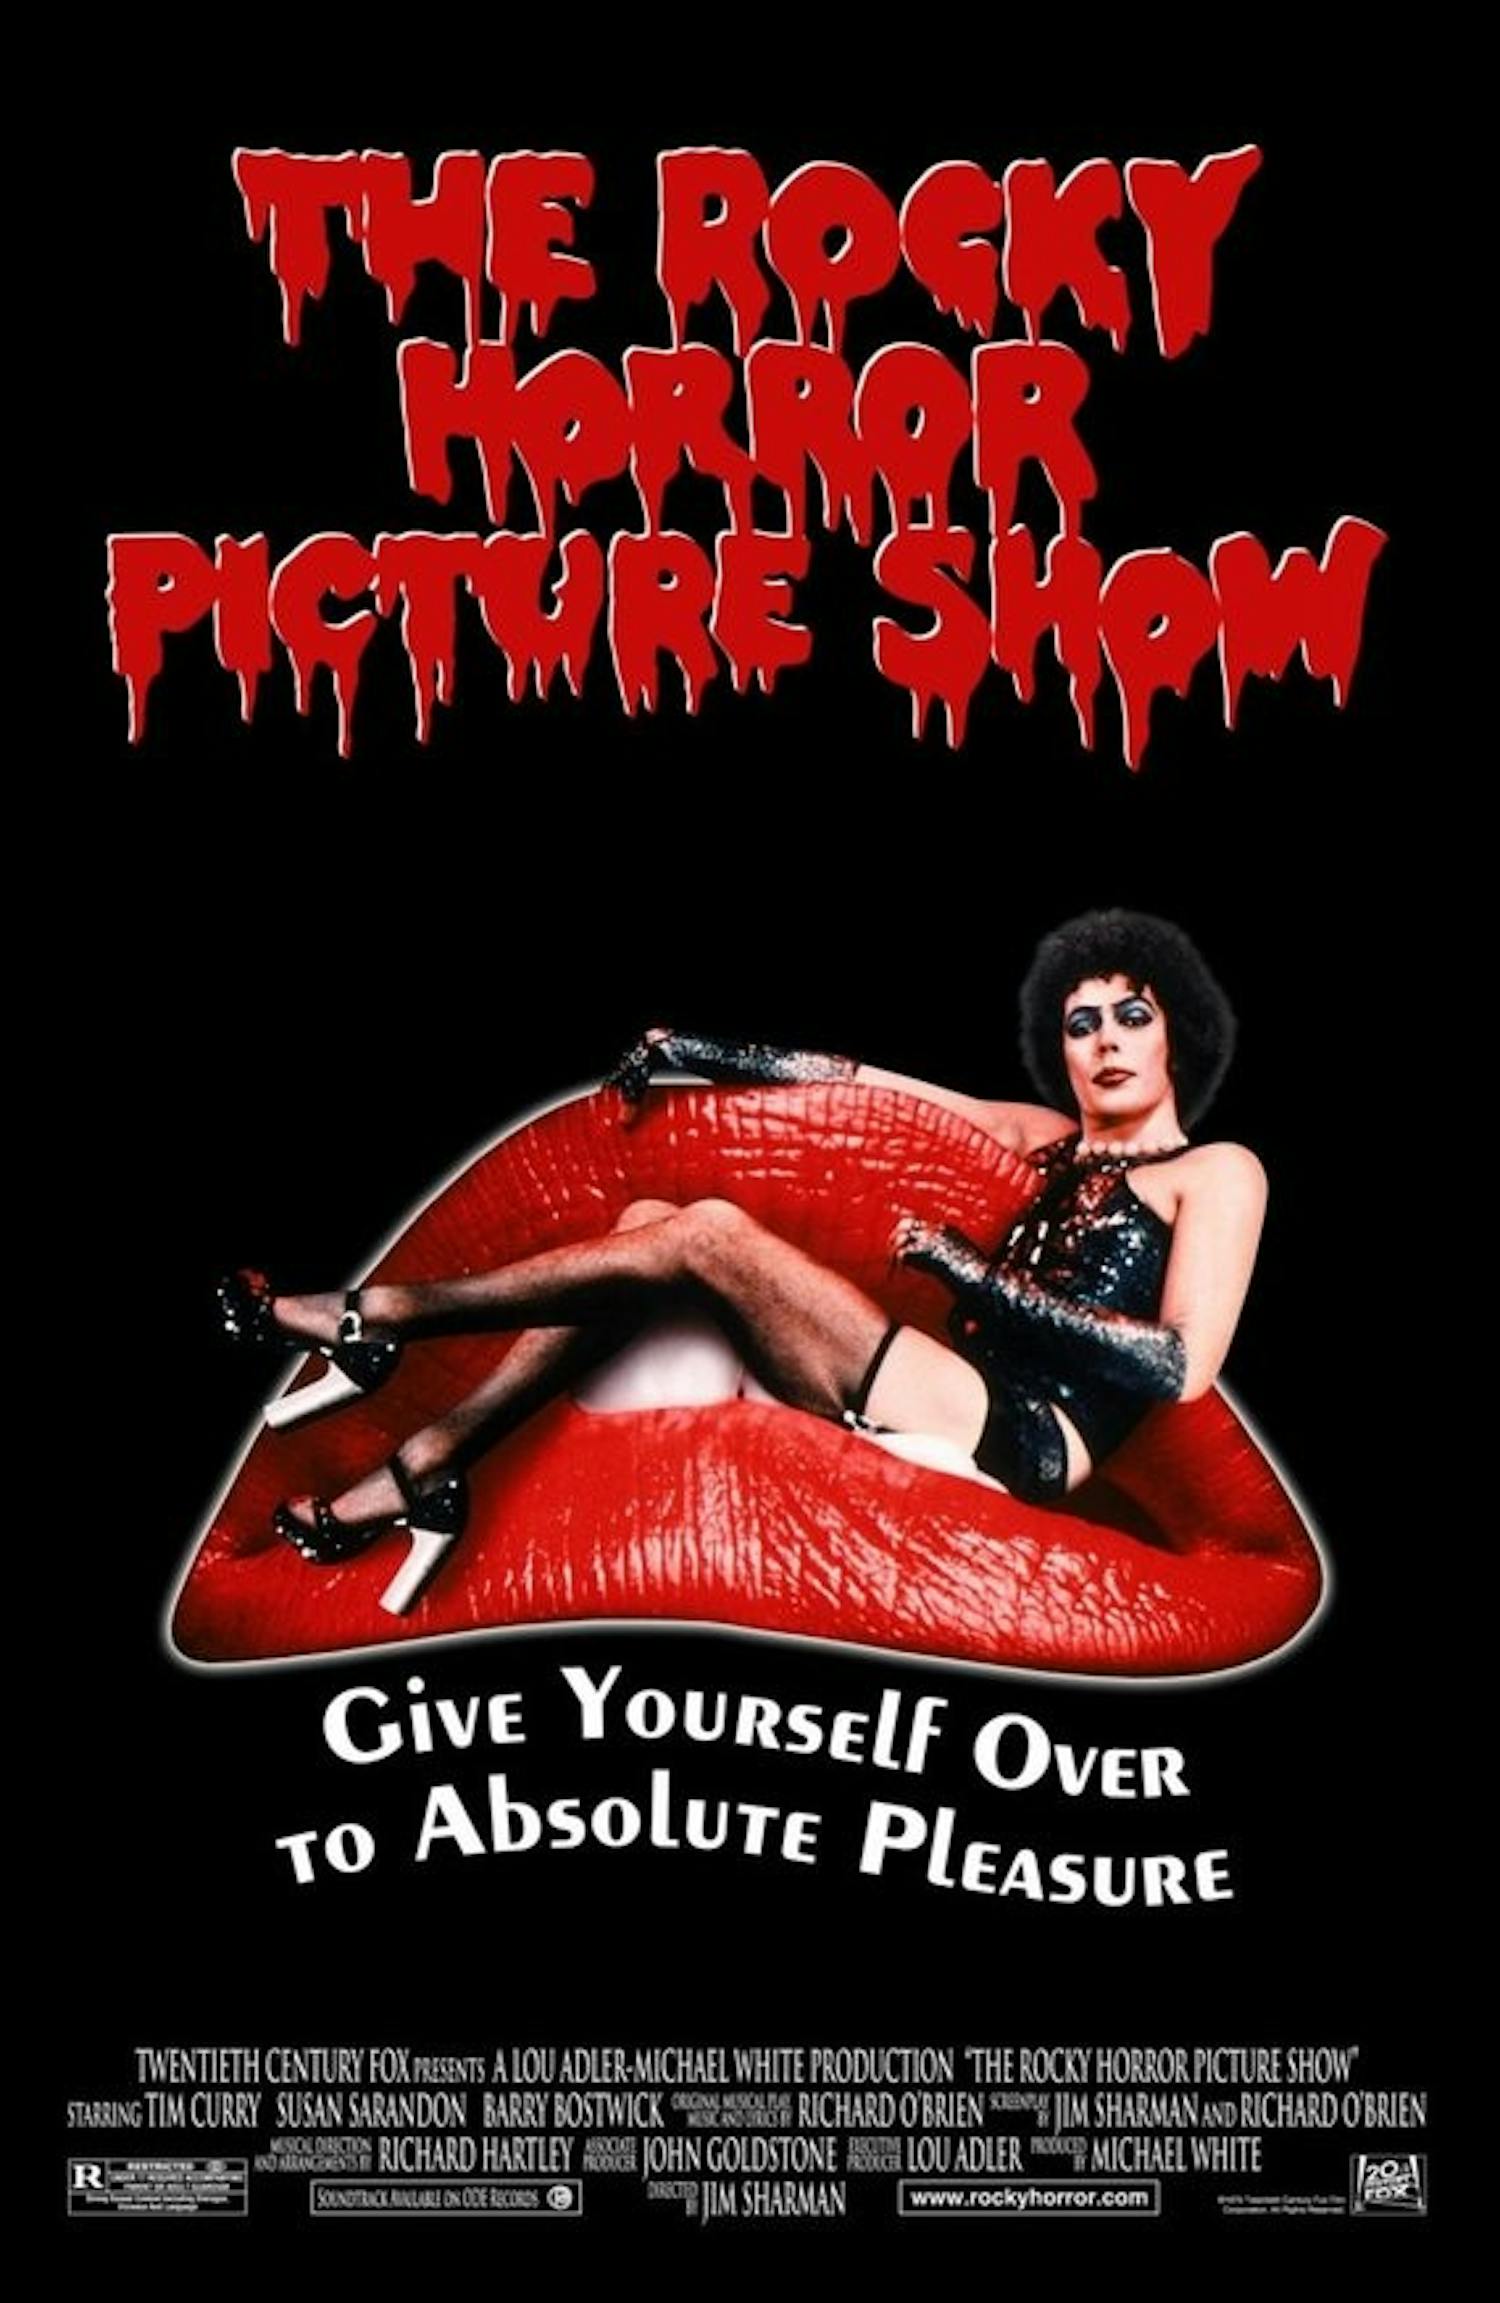 "Rocky Horror" is a legacy, a cultural monument and a beacon for anyone who feels outcasted.